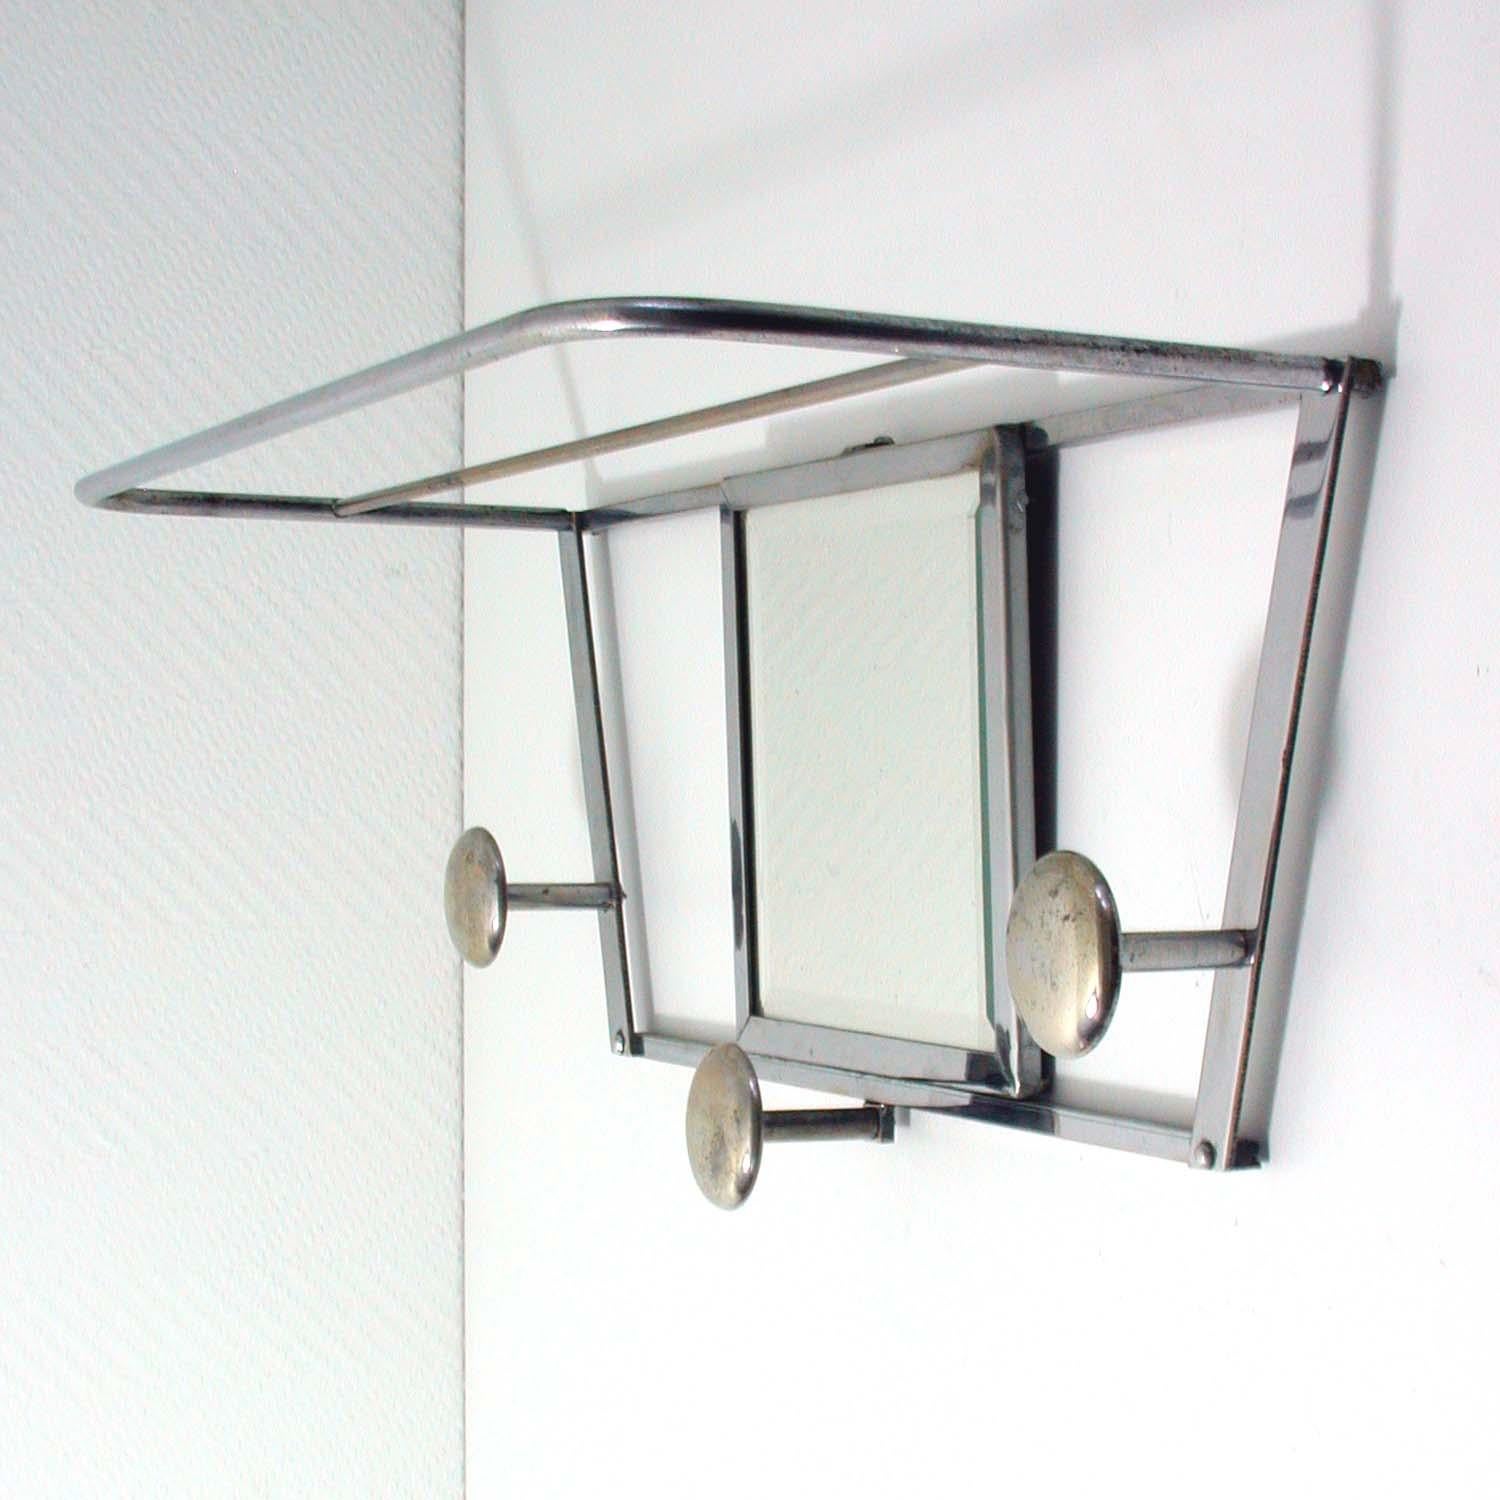 This Industrial style vintage coat rack was manufactured in France in the 1930s. It is made of chrome and has got three hooks and a mirror.